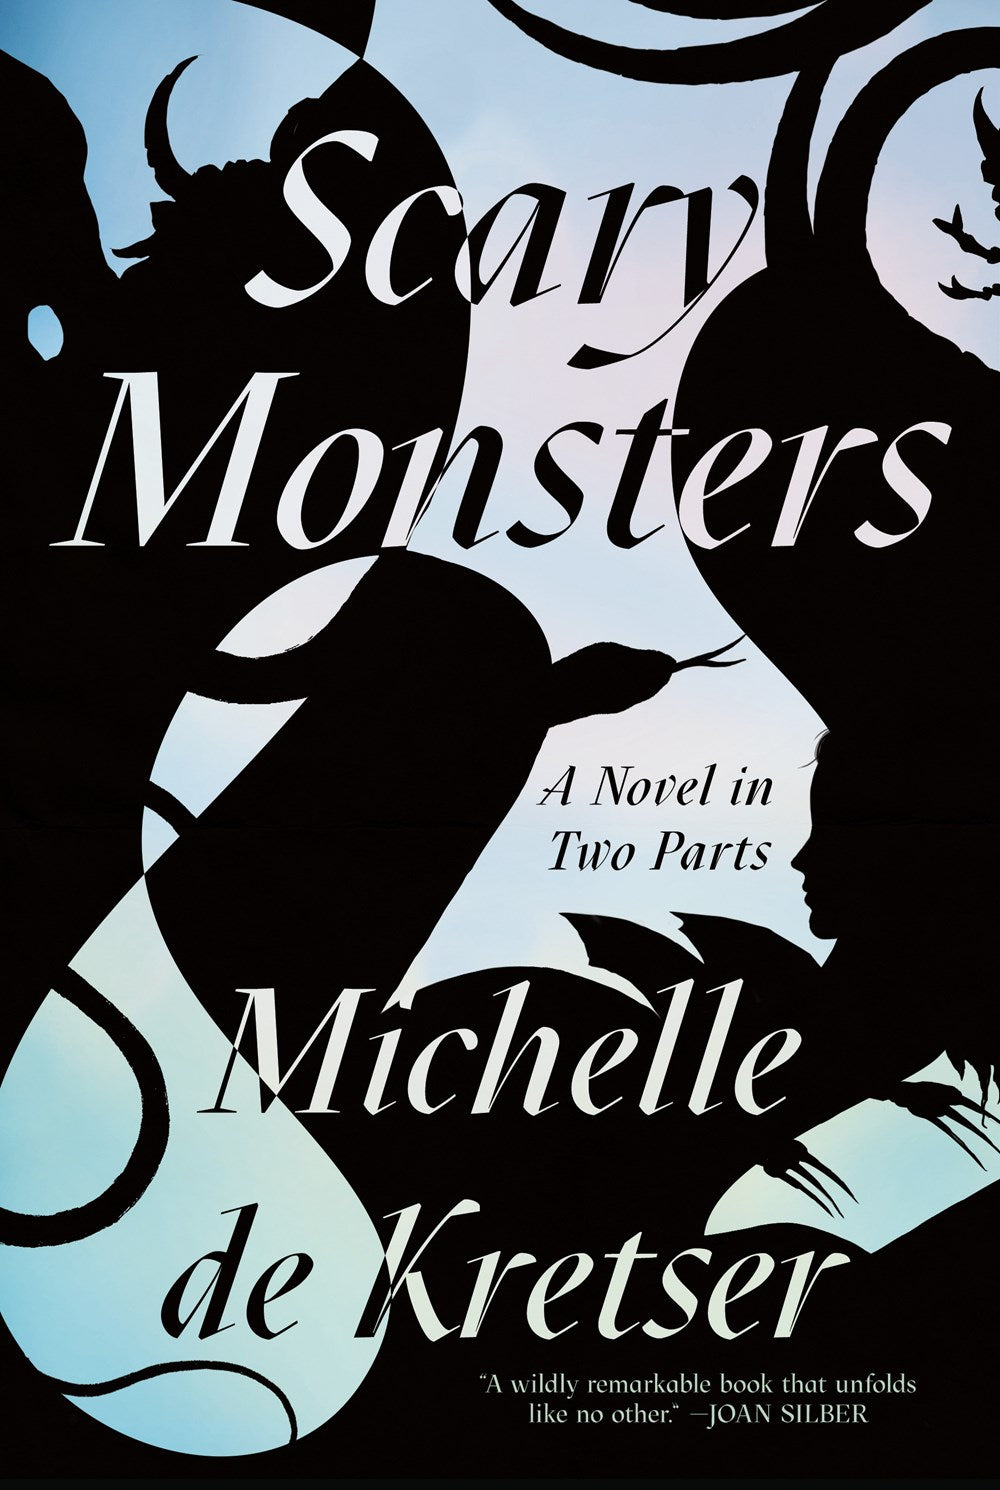 Scary Monsters: A Novel in Two Parts by Michelle de Krester